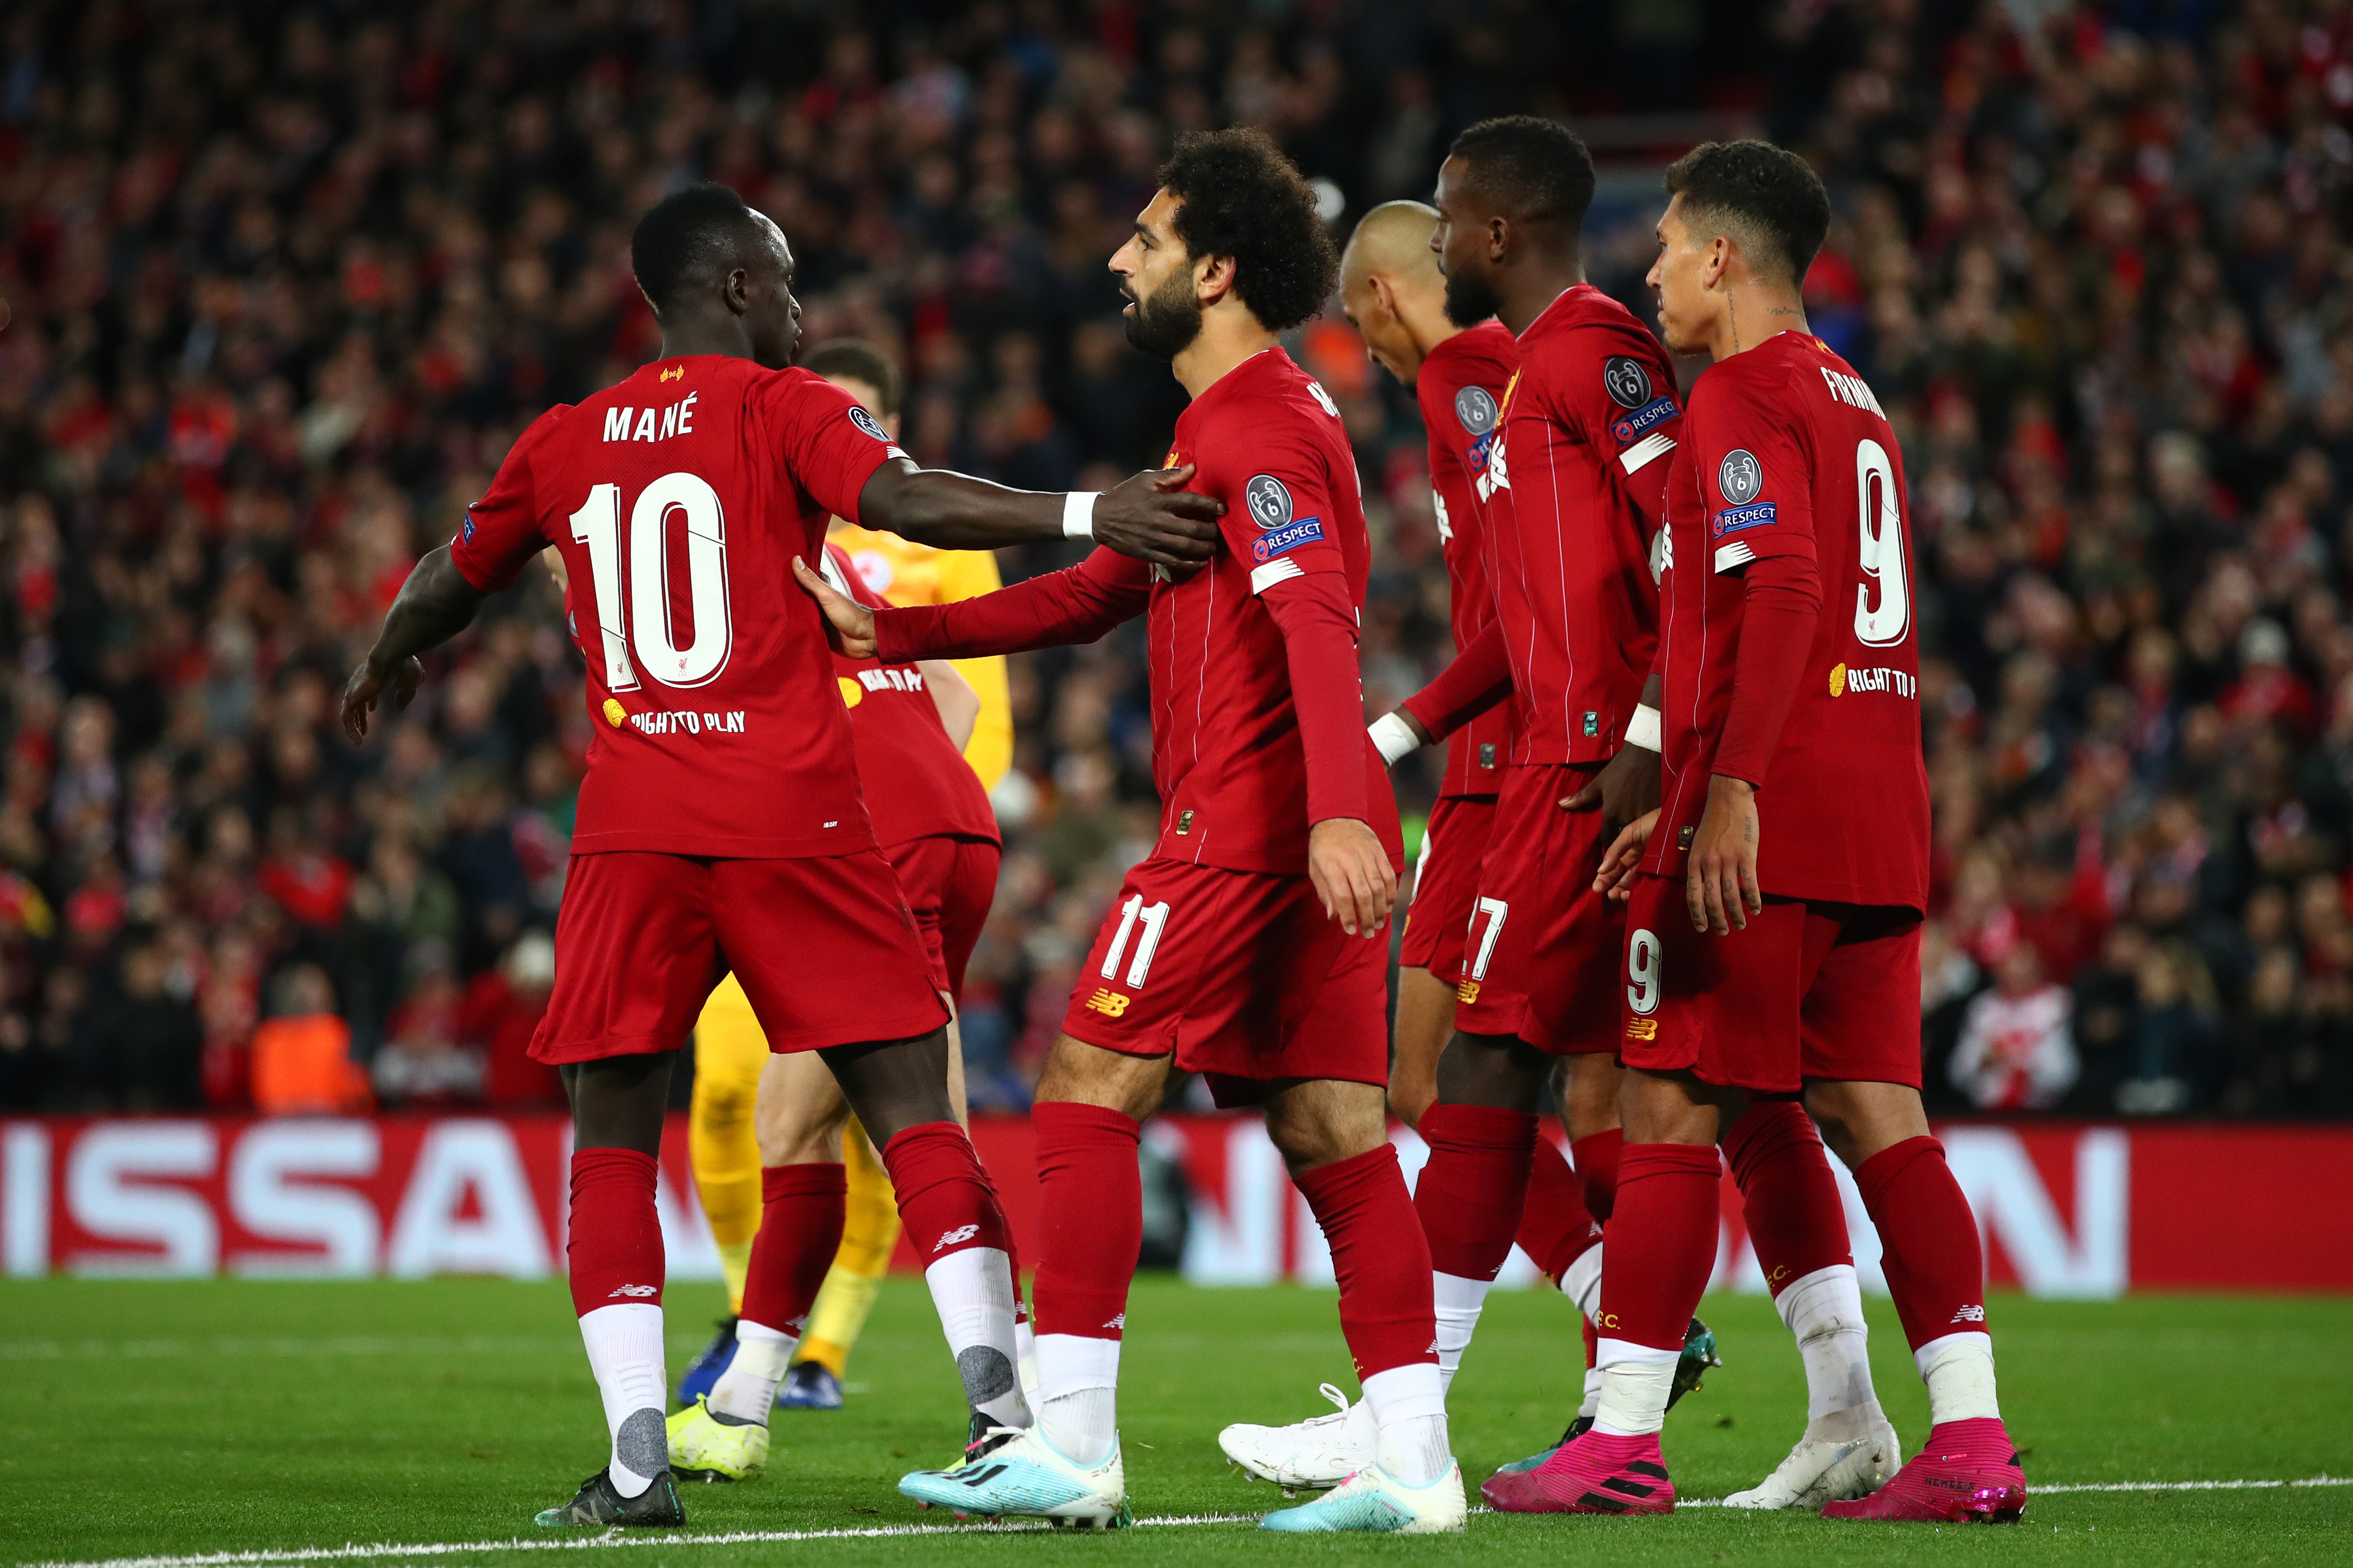 LIVERPOOL, ENGLAND - OCTOBER 02: Mohamed Salah of Liverpool celebrates with Sadio Mane after he scores his sides fourth goal during the UEFA Champions League group E match between Liverpool FC and RB Salzburg at Anfield on October 02, 2019 in Liverpool, United Kingdom. (Photo by Clive Brunskill/Getty Images)